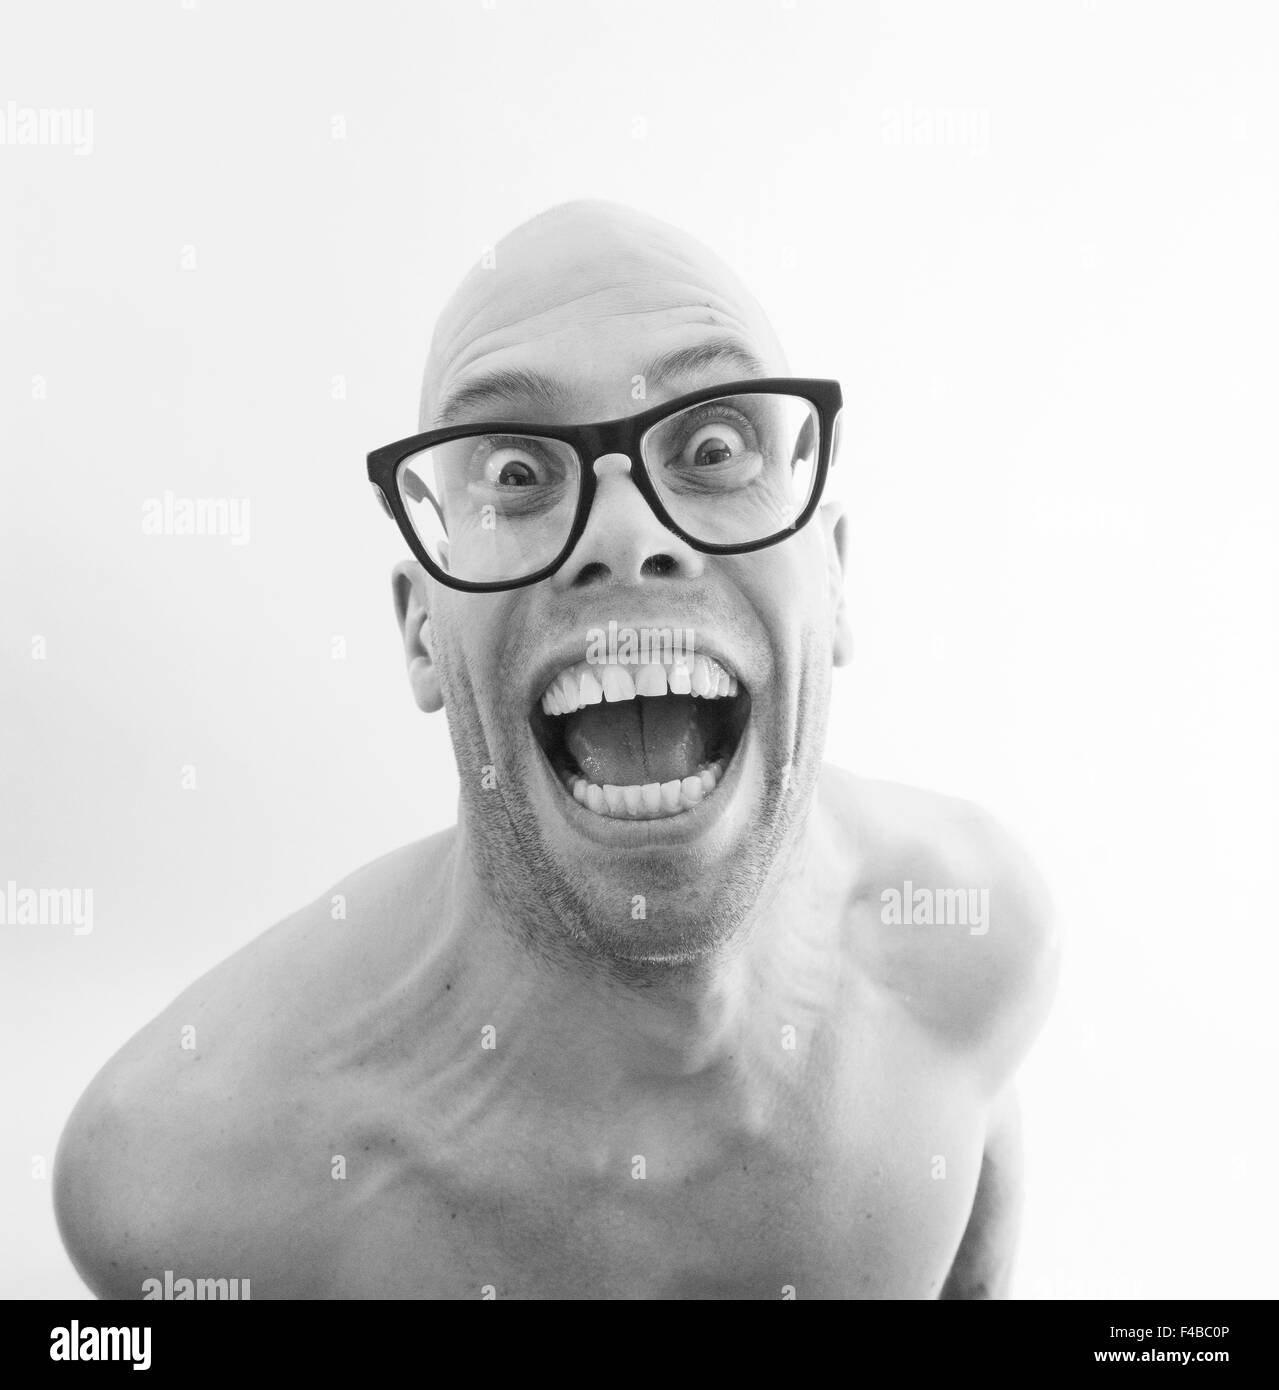 30-34 years adults only bald headed black and white body language catalogue 2 conceptual effort emotional series expression Stock Photo